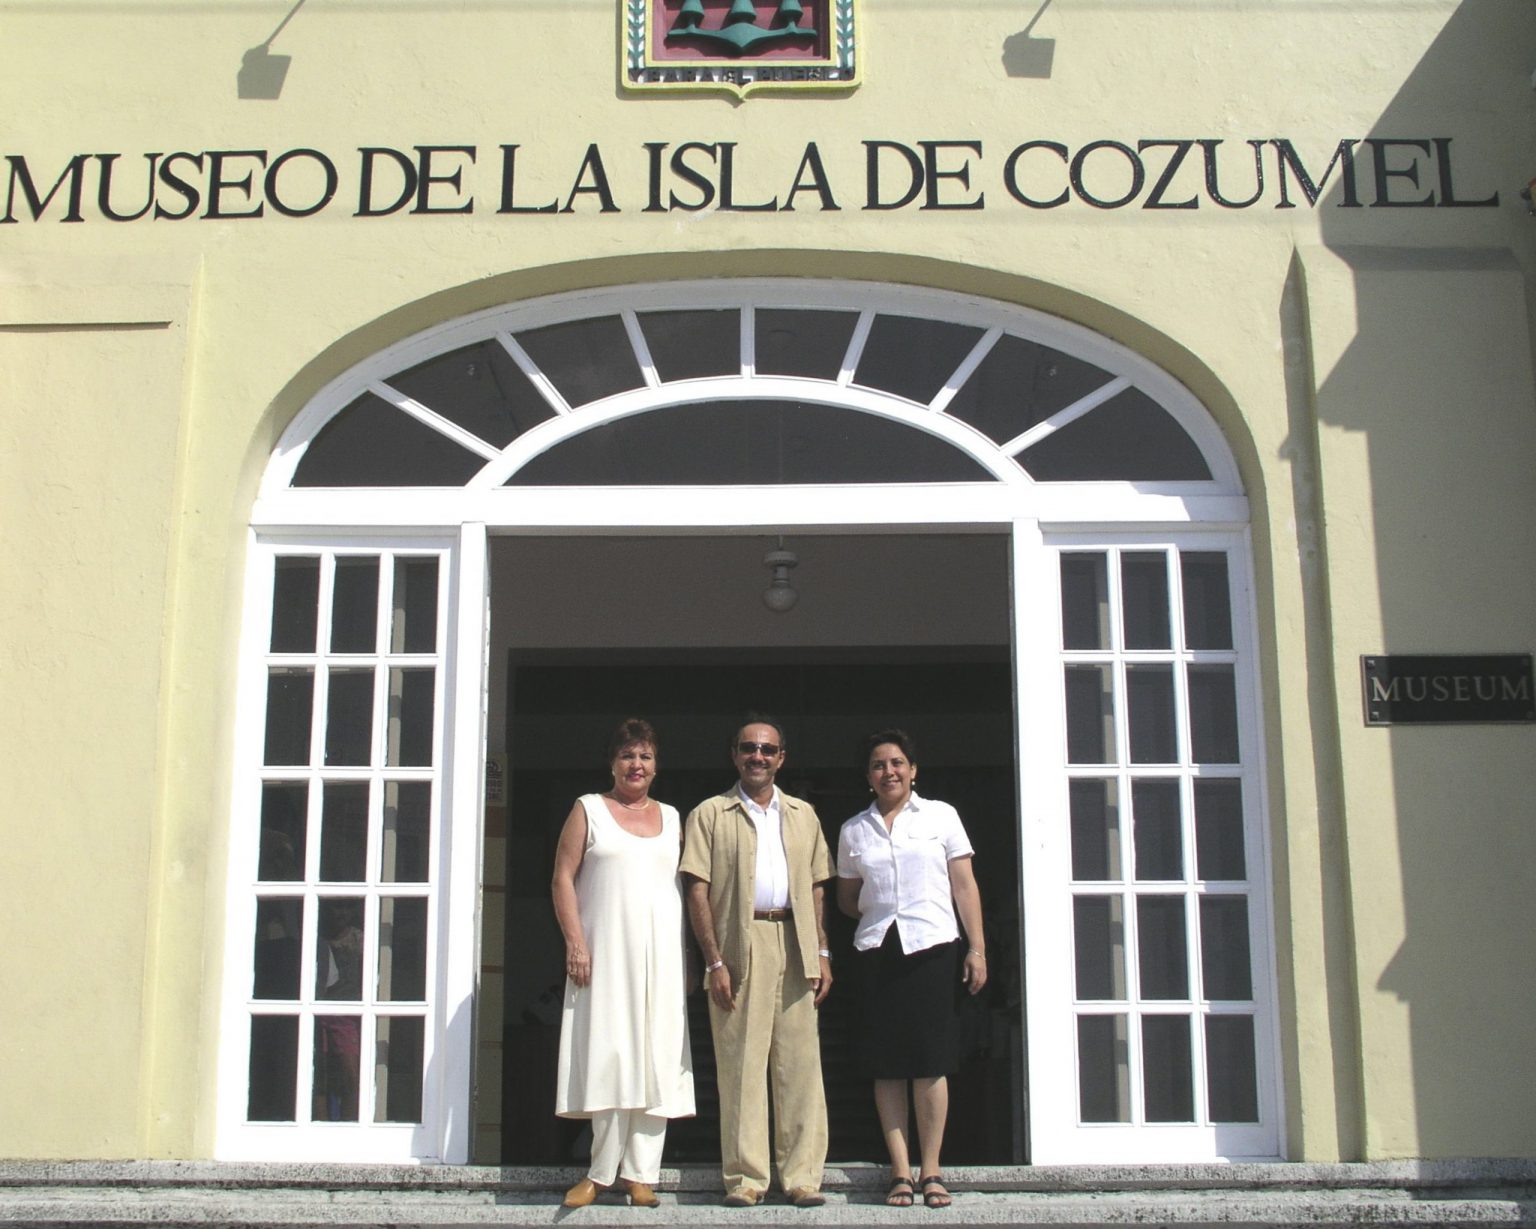 Antoine Gaber, the historian, art critic from México Prof. Matty Roca, and the Museum of Cozumel curator during the Passion for Life solo exhibition at the Museum de la Isla de Cozumel, Quintana Roo, Mexico.